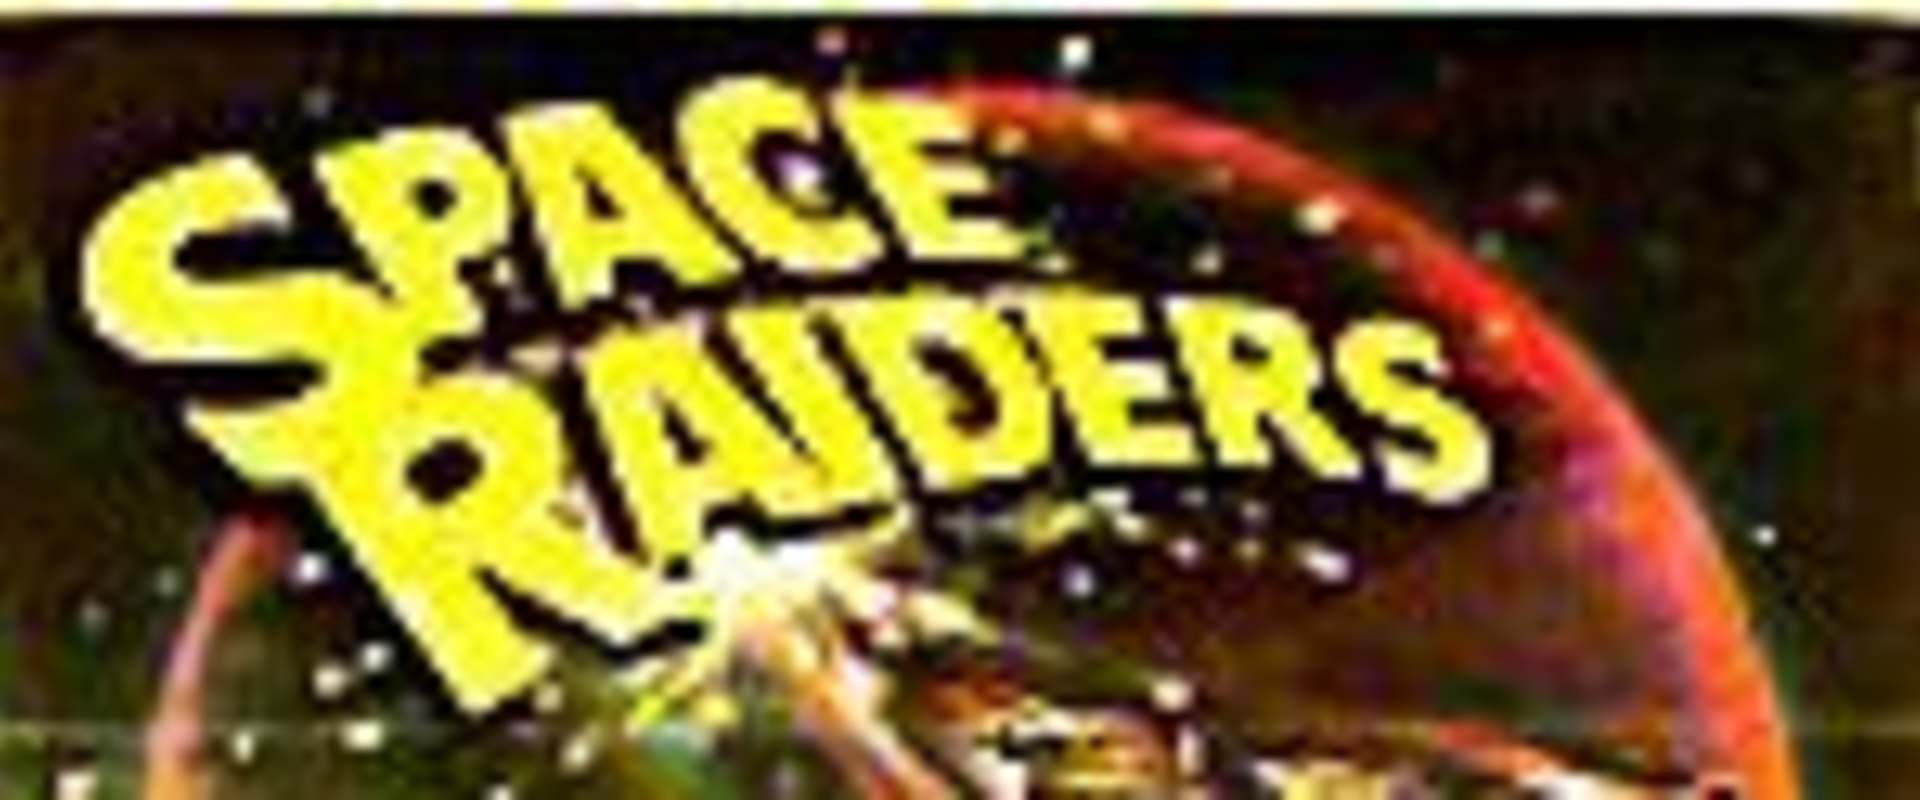 Space Raiders background 1